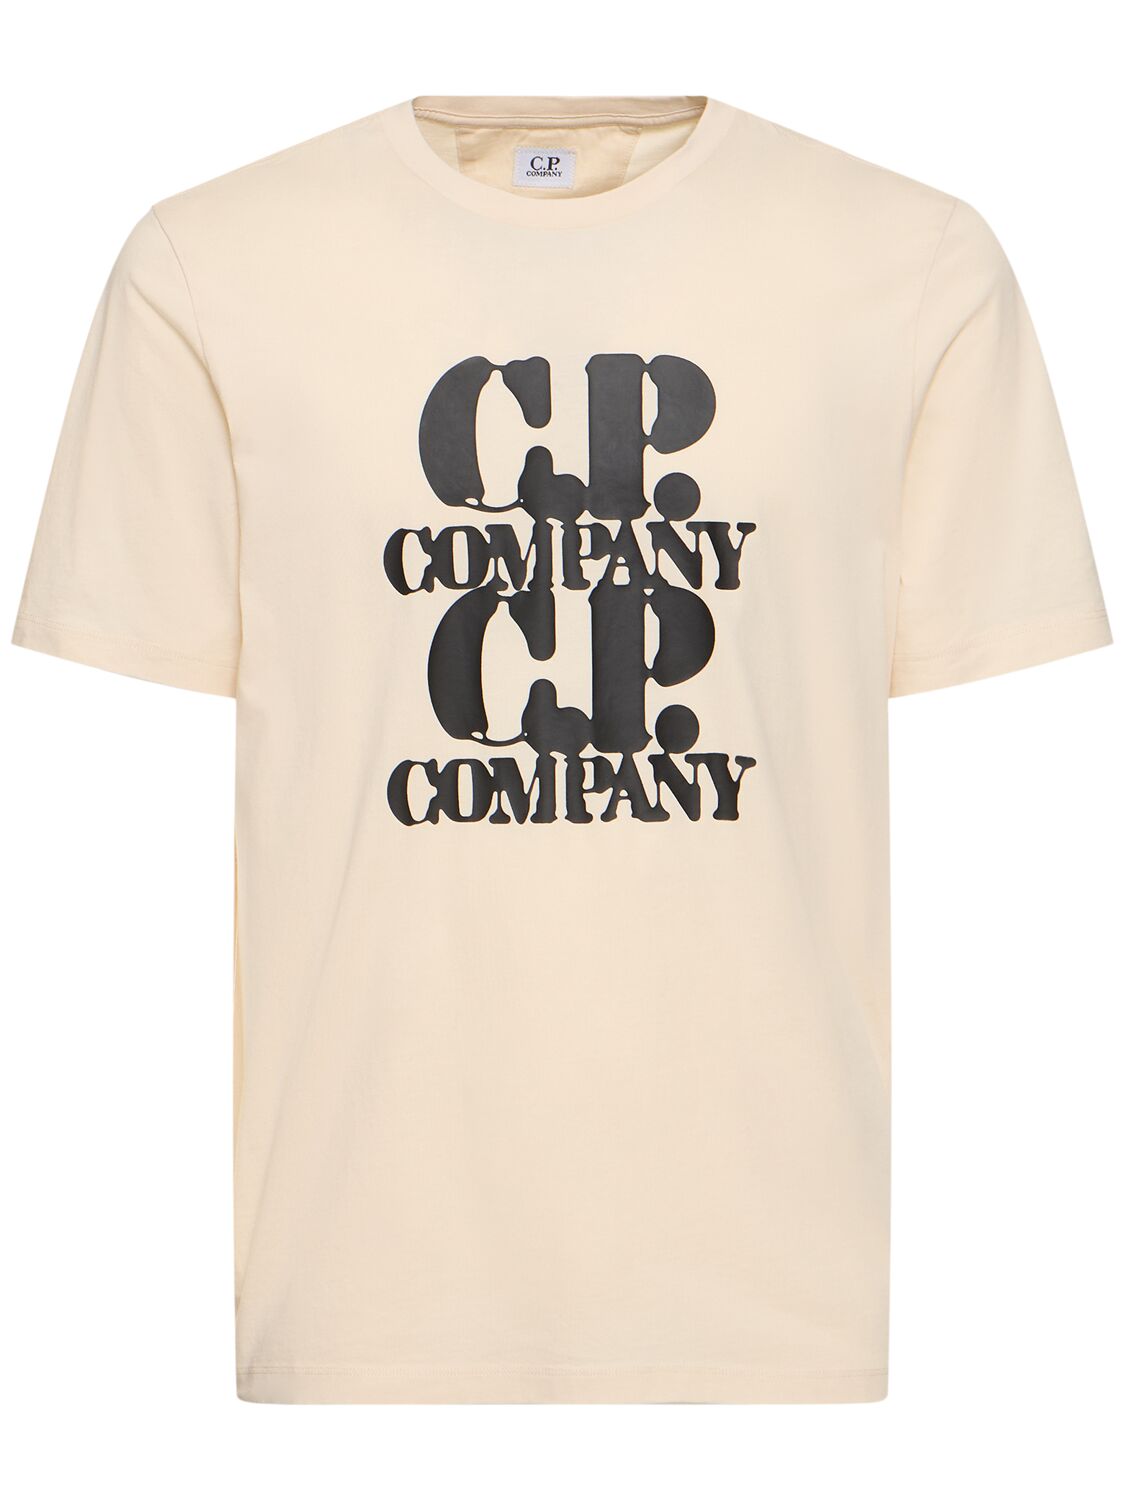 C.p. Company Graphic T-shirt In Pistachio Shell